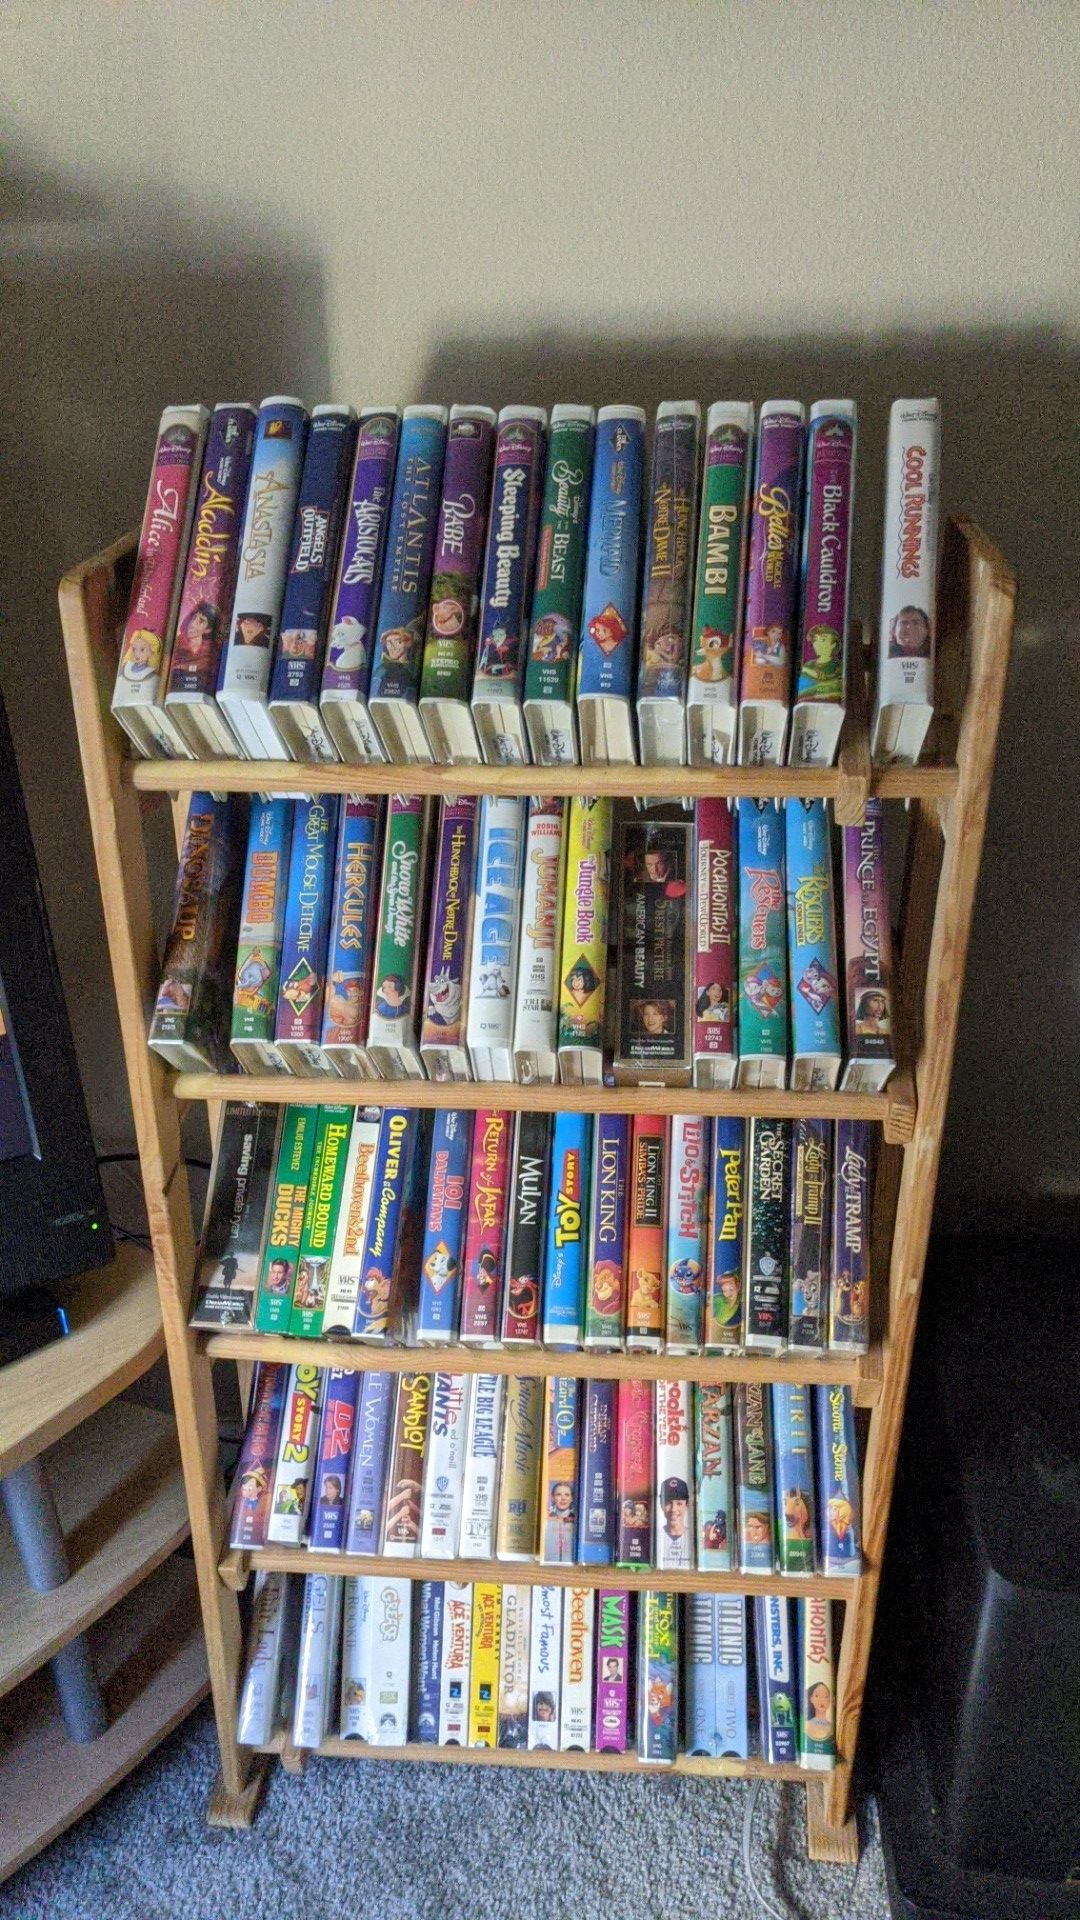 Disney/kids VHS movie collection with VCR